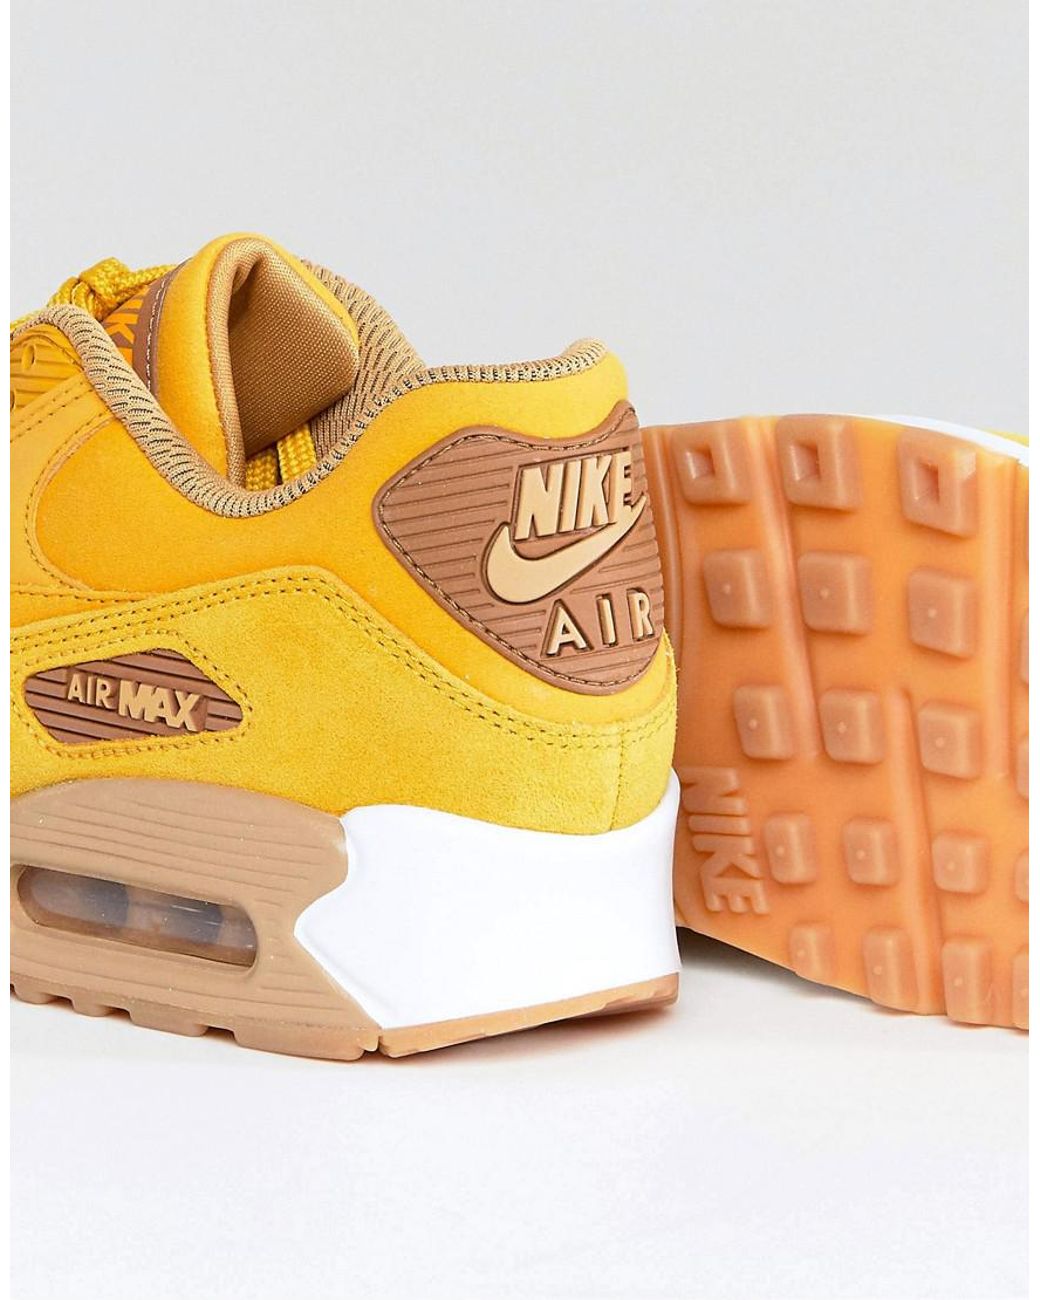 Nike Air Max 90 Mustard Suede Trainers 